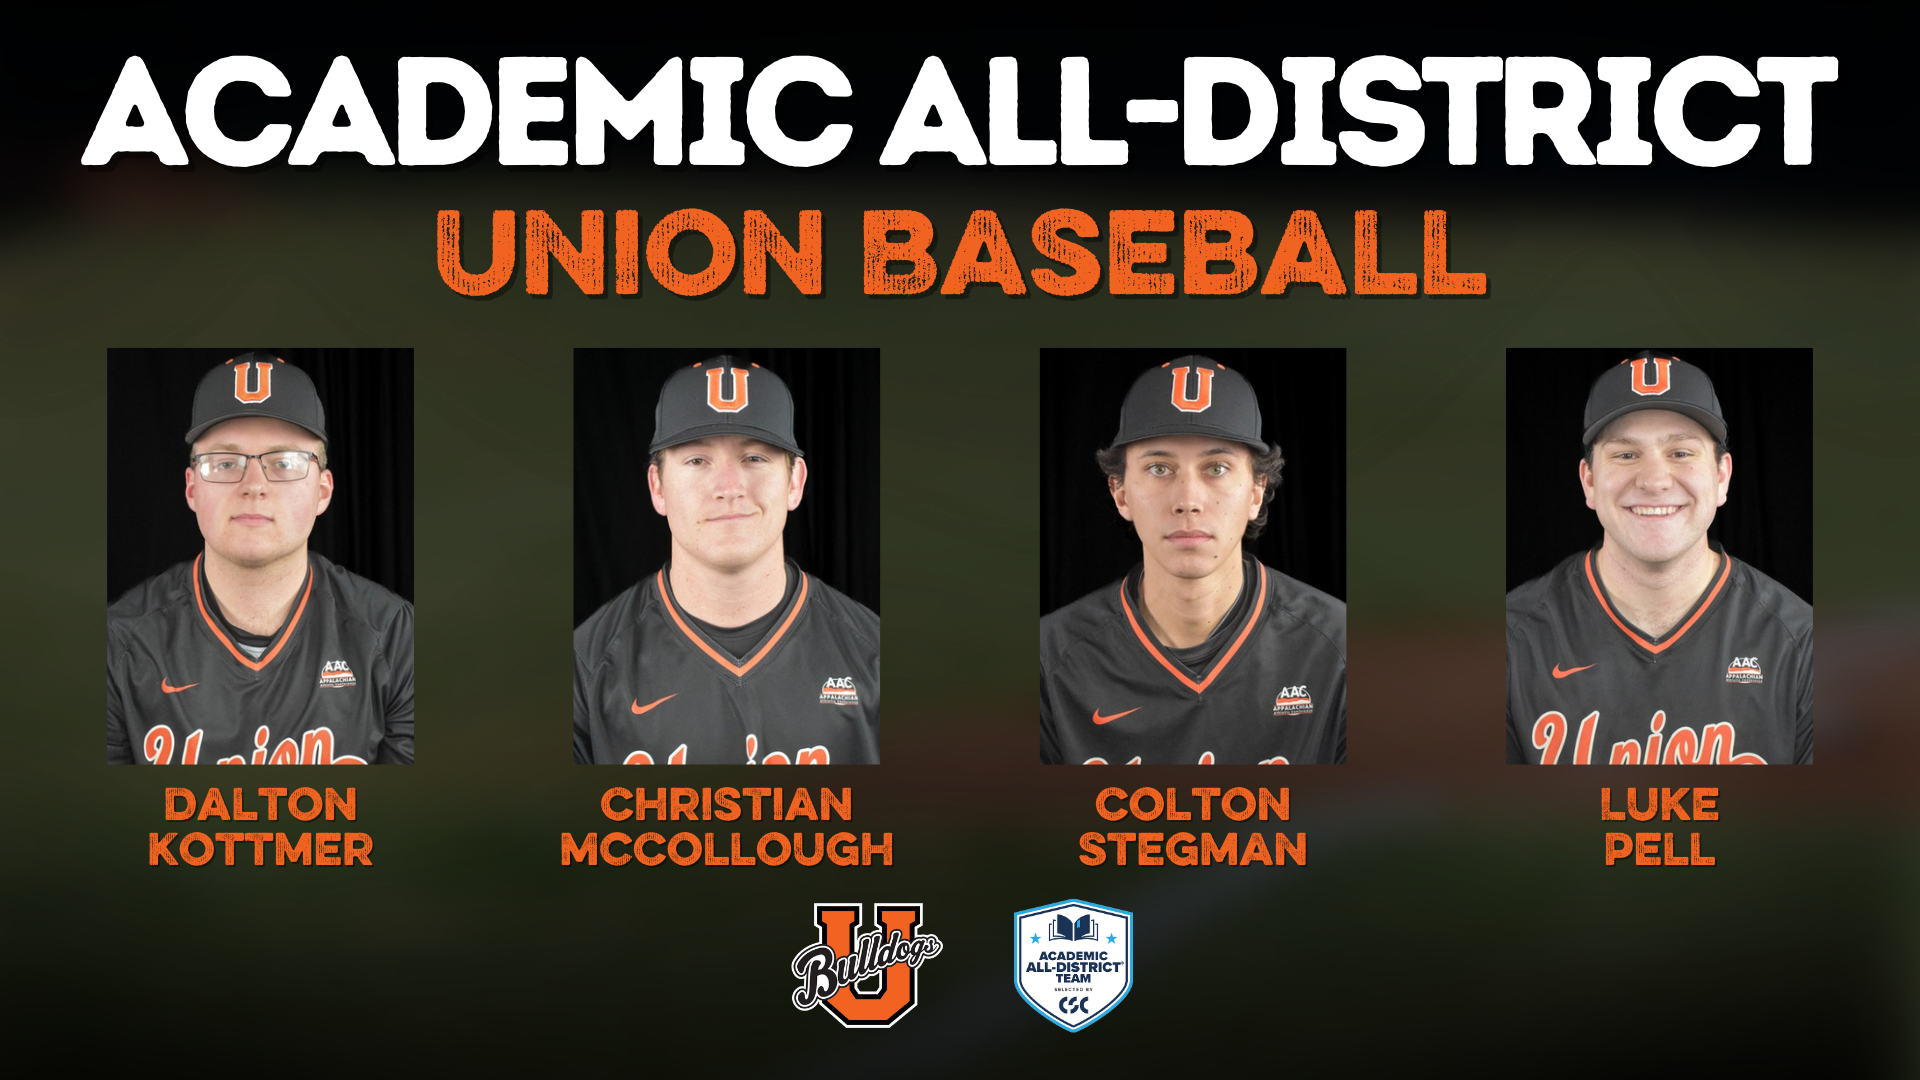 Four Union baseball players named to CSC Academic All-District Team